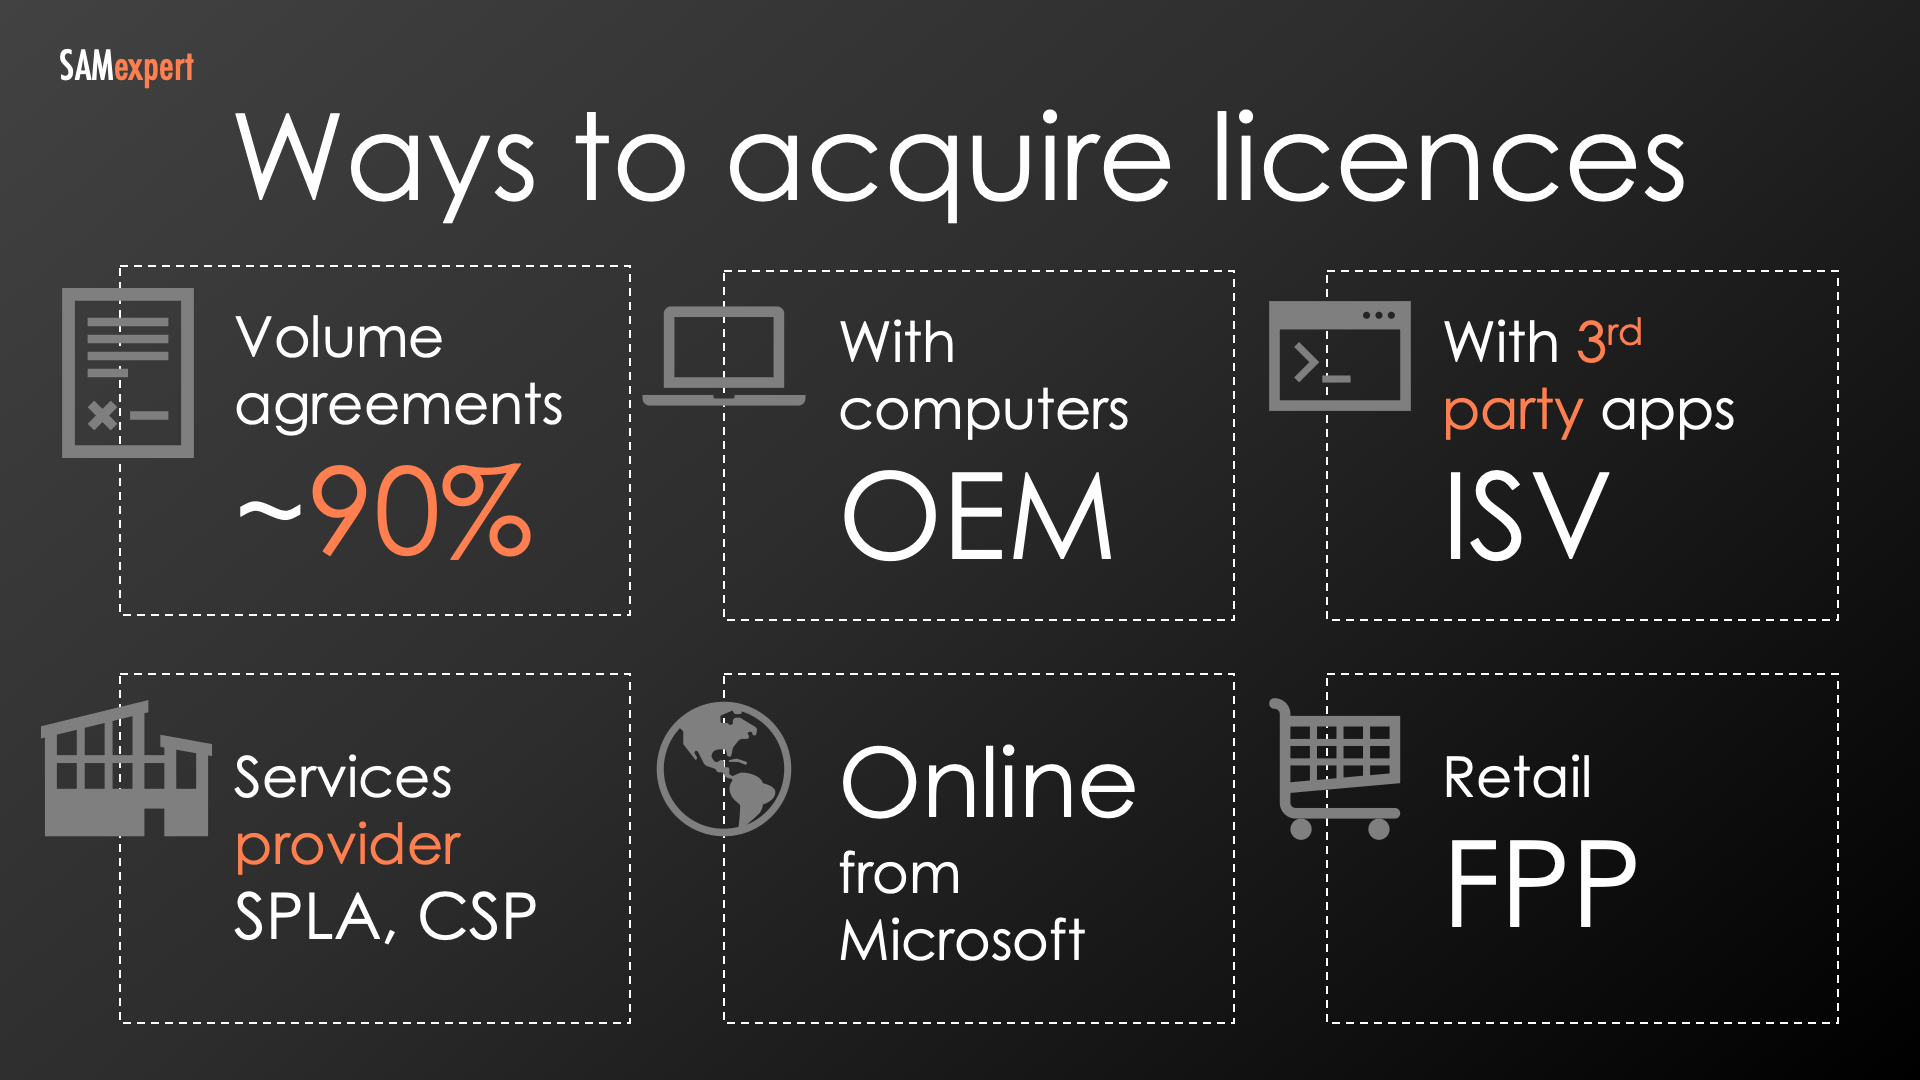 How to Tell If Windows 11 License is Retail, OEM, or Volume